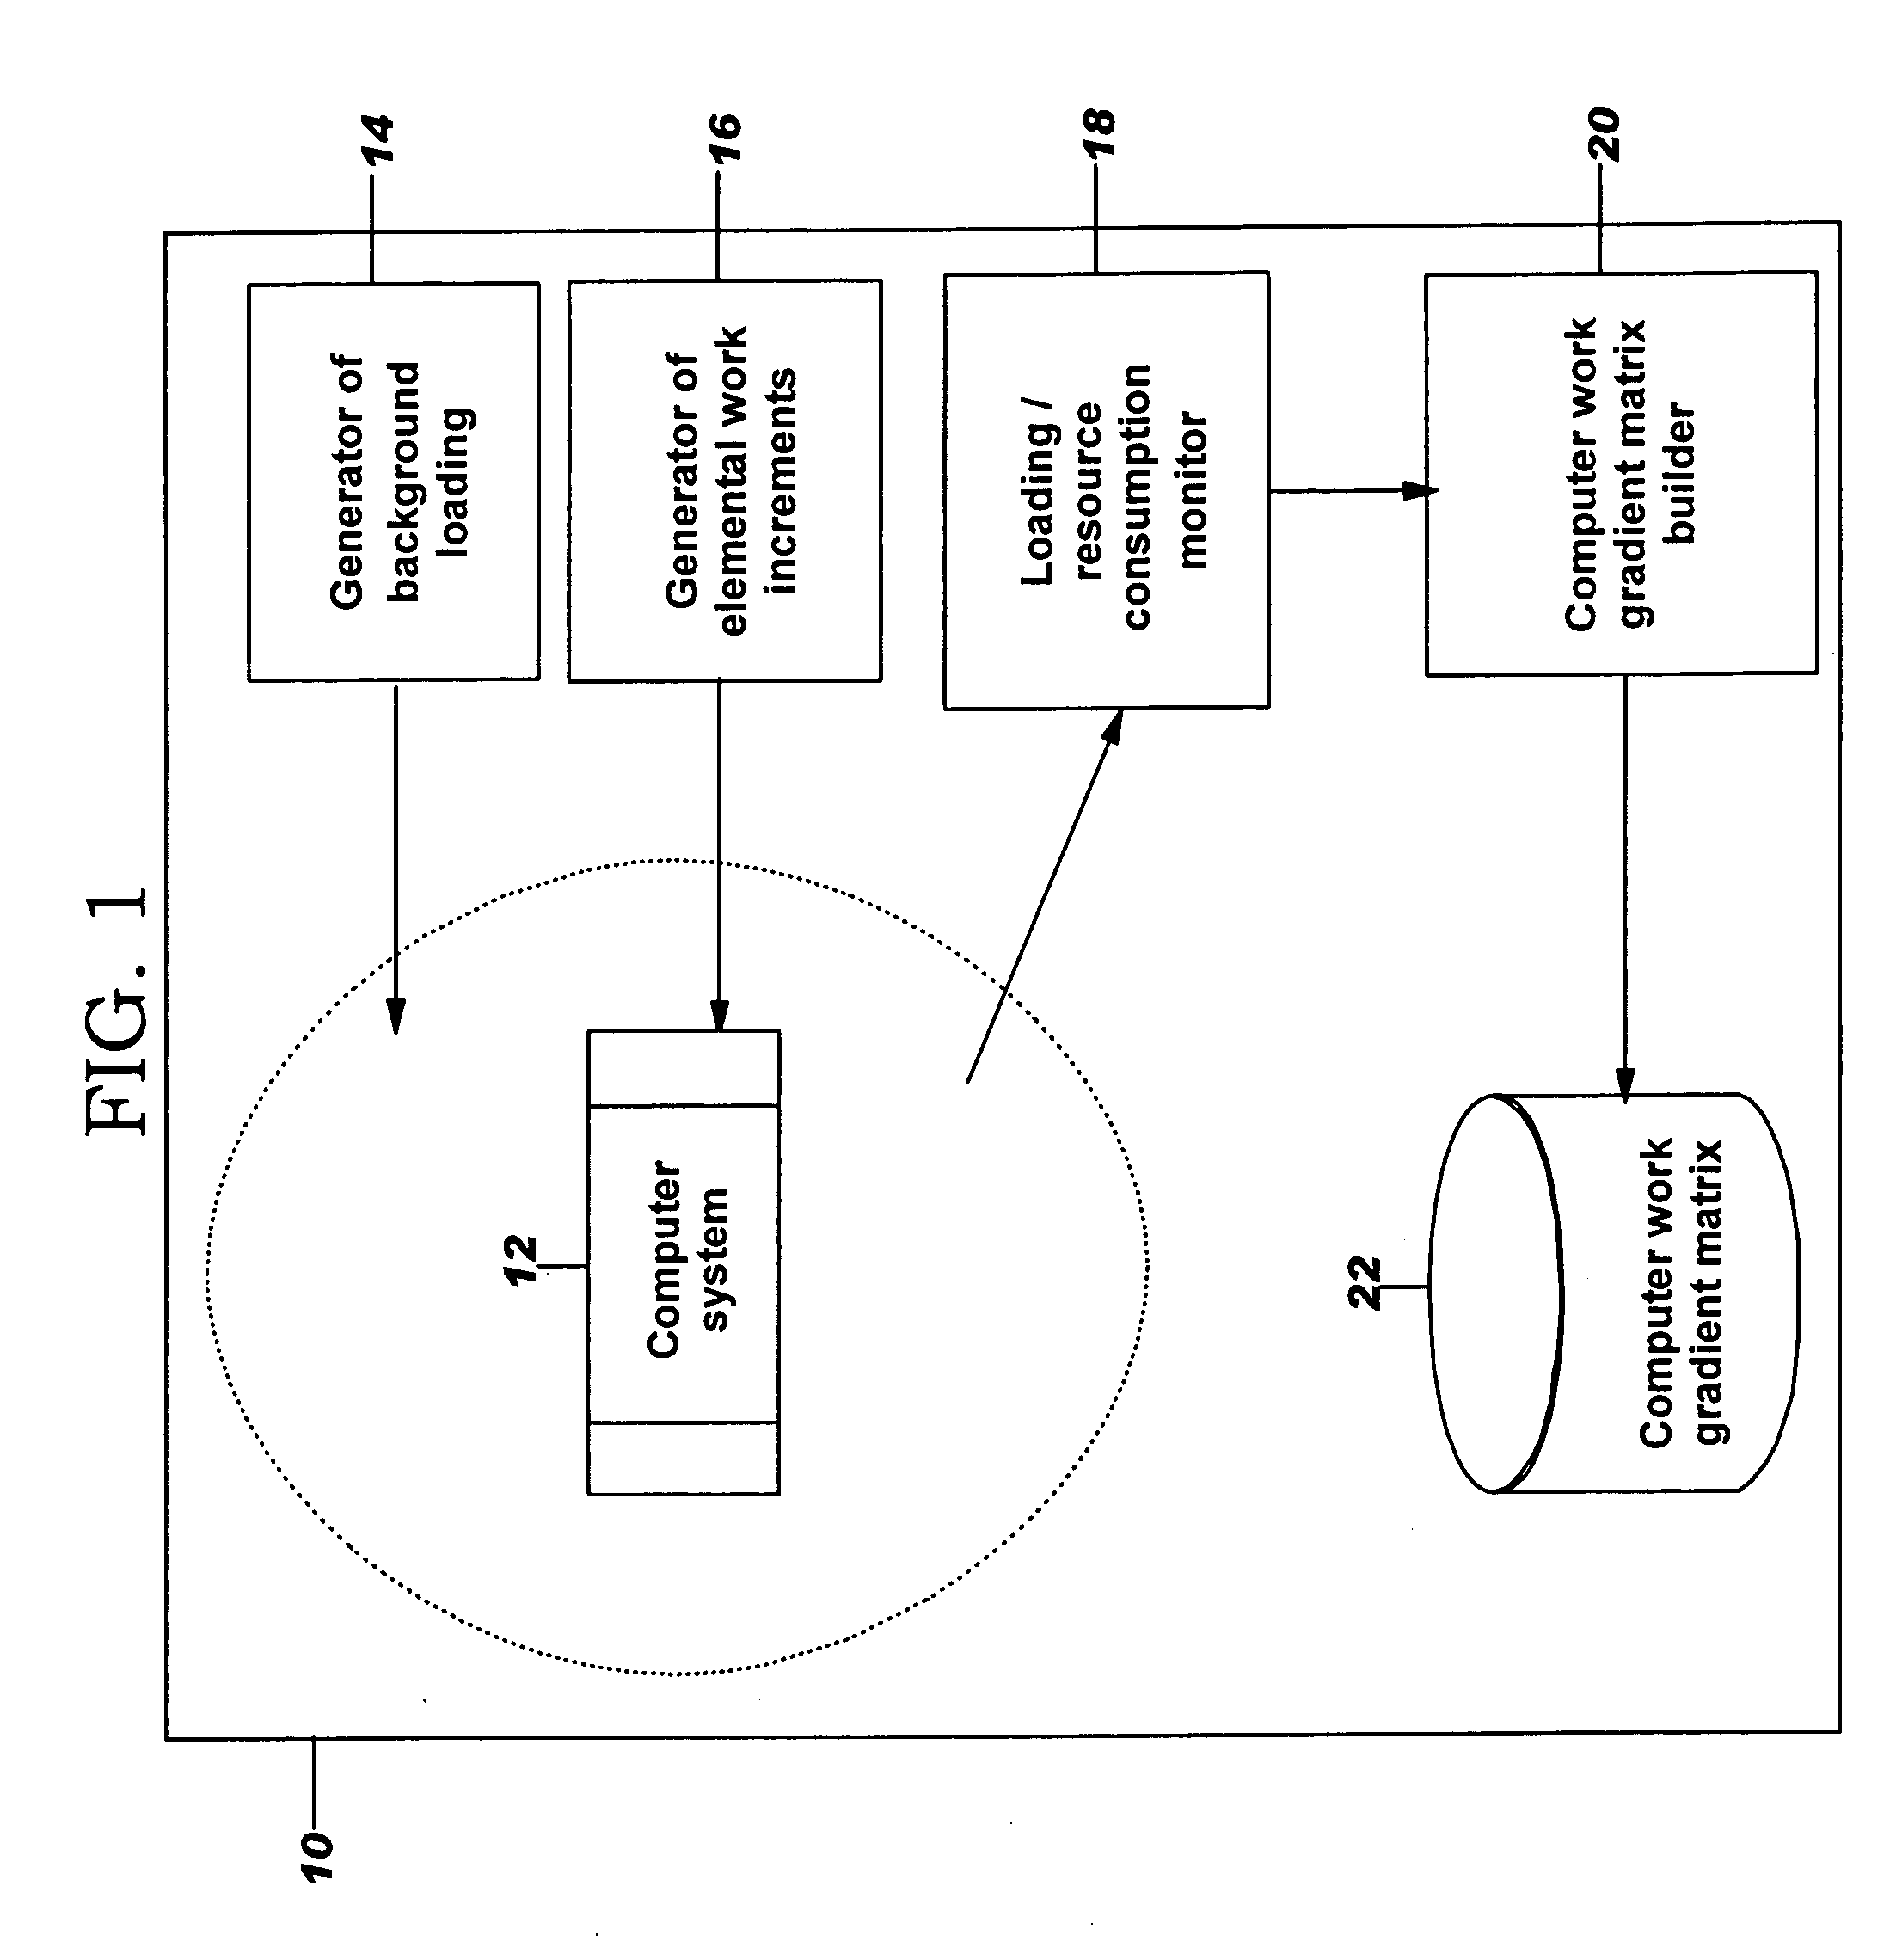 Method, system and program product for approximating resource consumption of a computer system